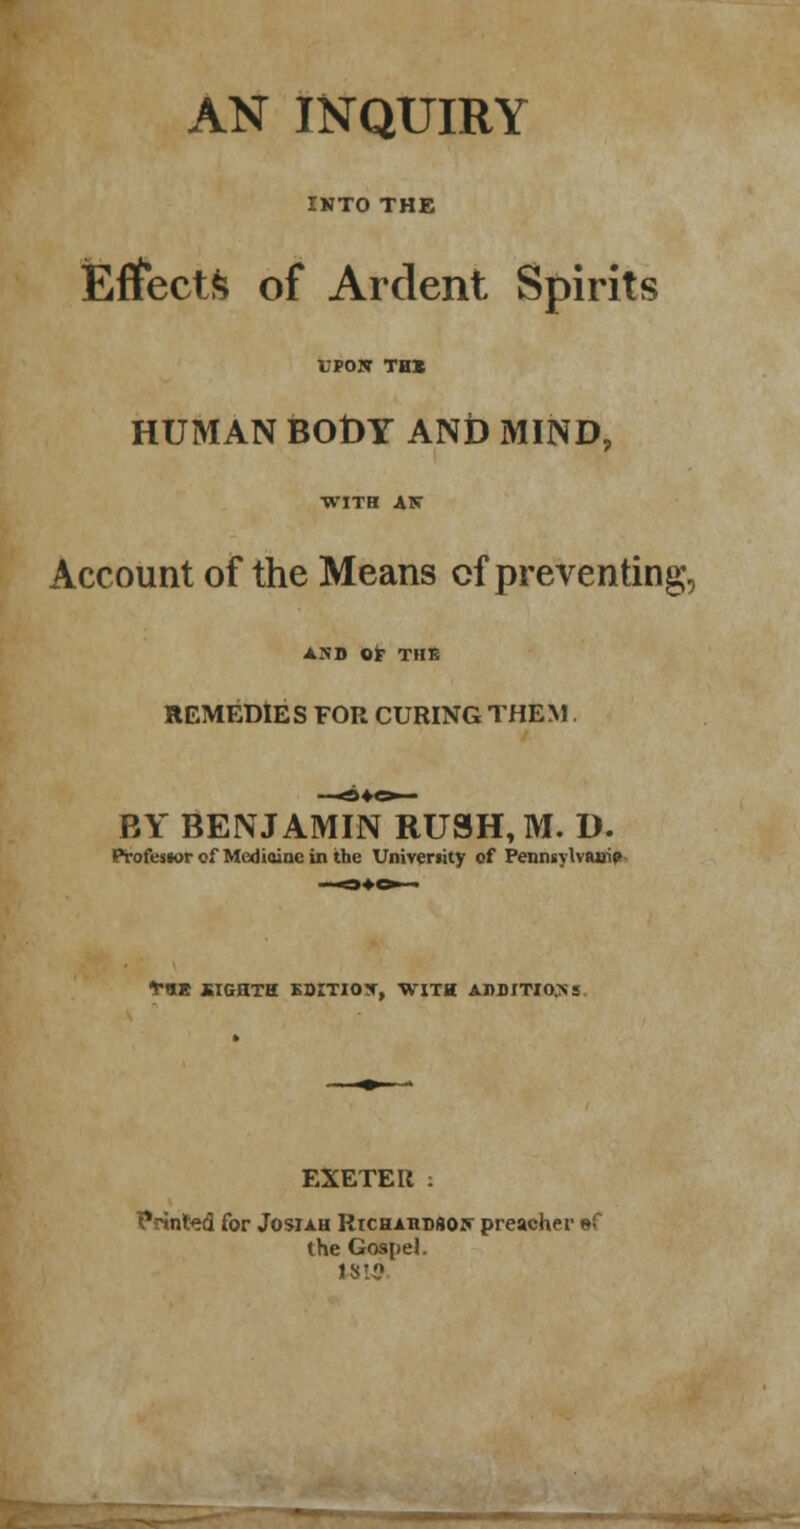 AN INQUIRY INTO THE Effects of Ardent Spirits UPOK TH* HUMAN BODY ANi> MIND, Account of the Means cf preventing;, AND OF THE REMEDIES FOR CURING THEM. BY BENJAMIN RUSH, M. D. Profcswrof Mediaincin the Univeriity of Pennsylvania T«E EIGHTH BBITIOX, WITH ADDITIONS EXETER : Printed for Josiah Rtchardsof preacher ef the Gospel. IS!?